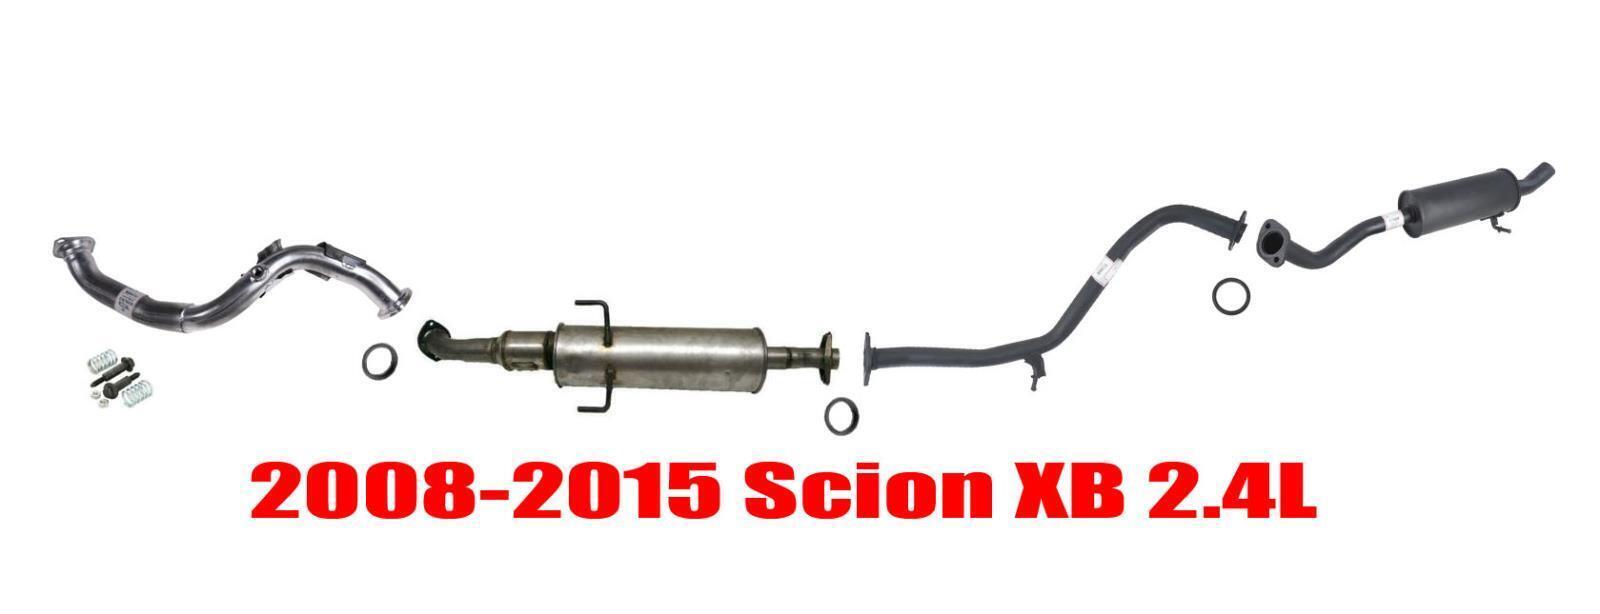 Front Engine Pipe Under Car Converter Exhaust System for Scion XB 2.4L 08-15